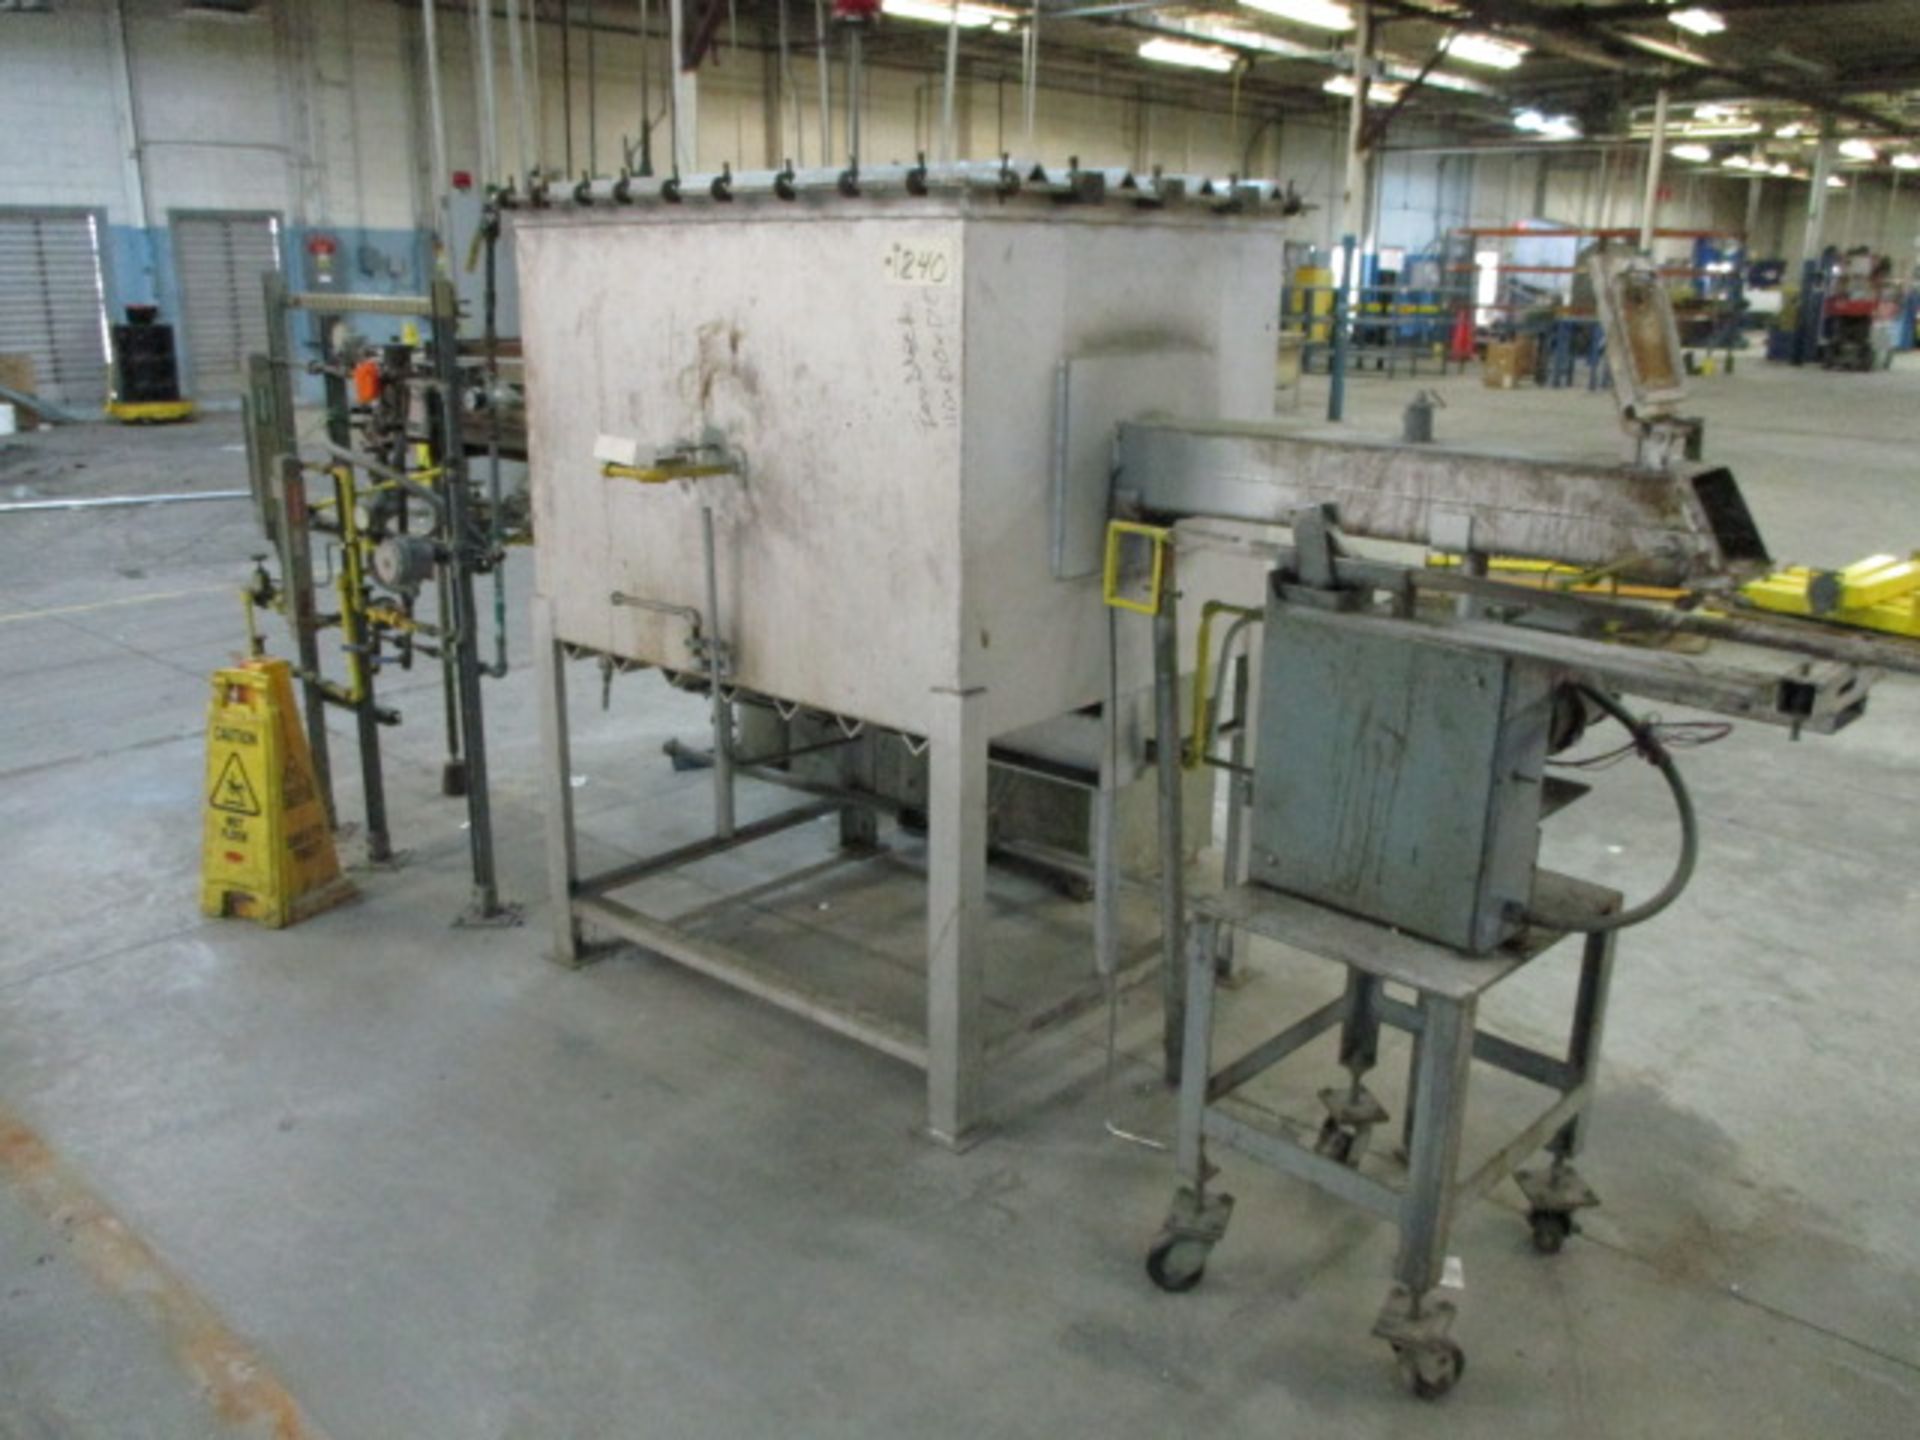 Electric Pusher Furnace with Molybdenum Heating Element, 8" W x 5" H Capacity x Approx 48" Long